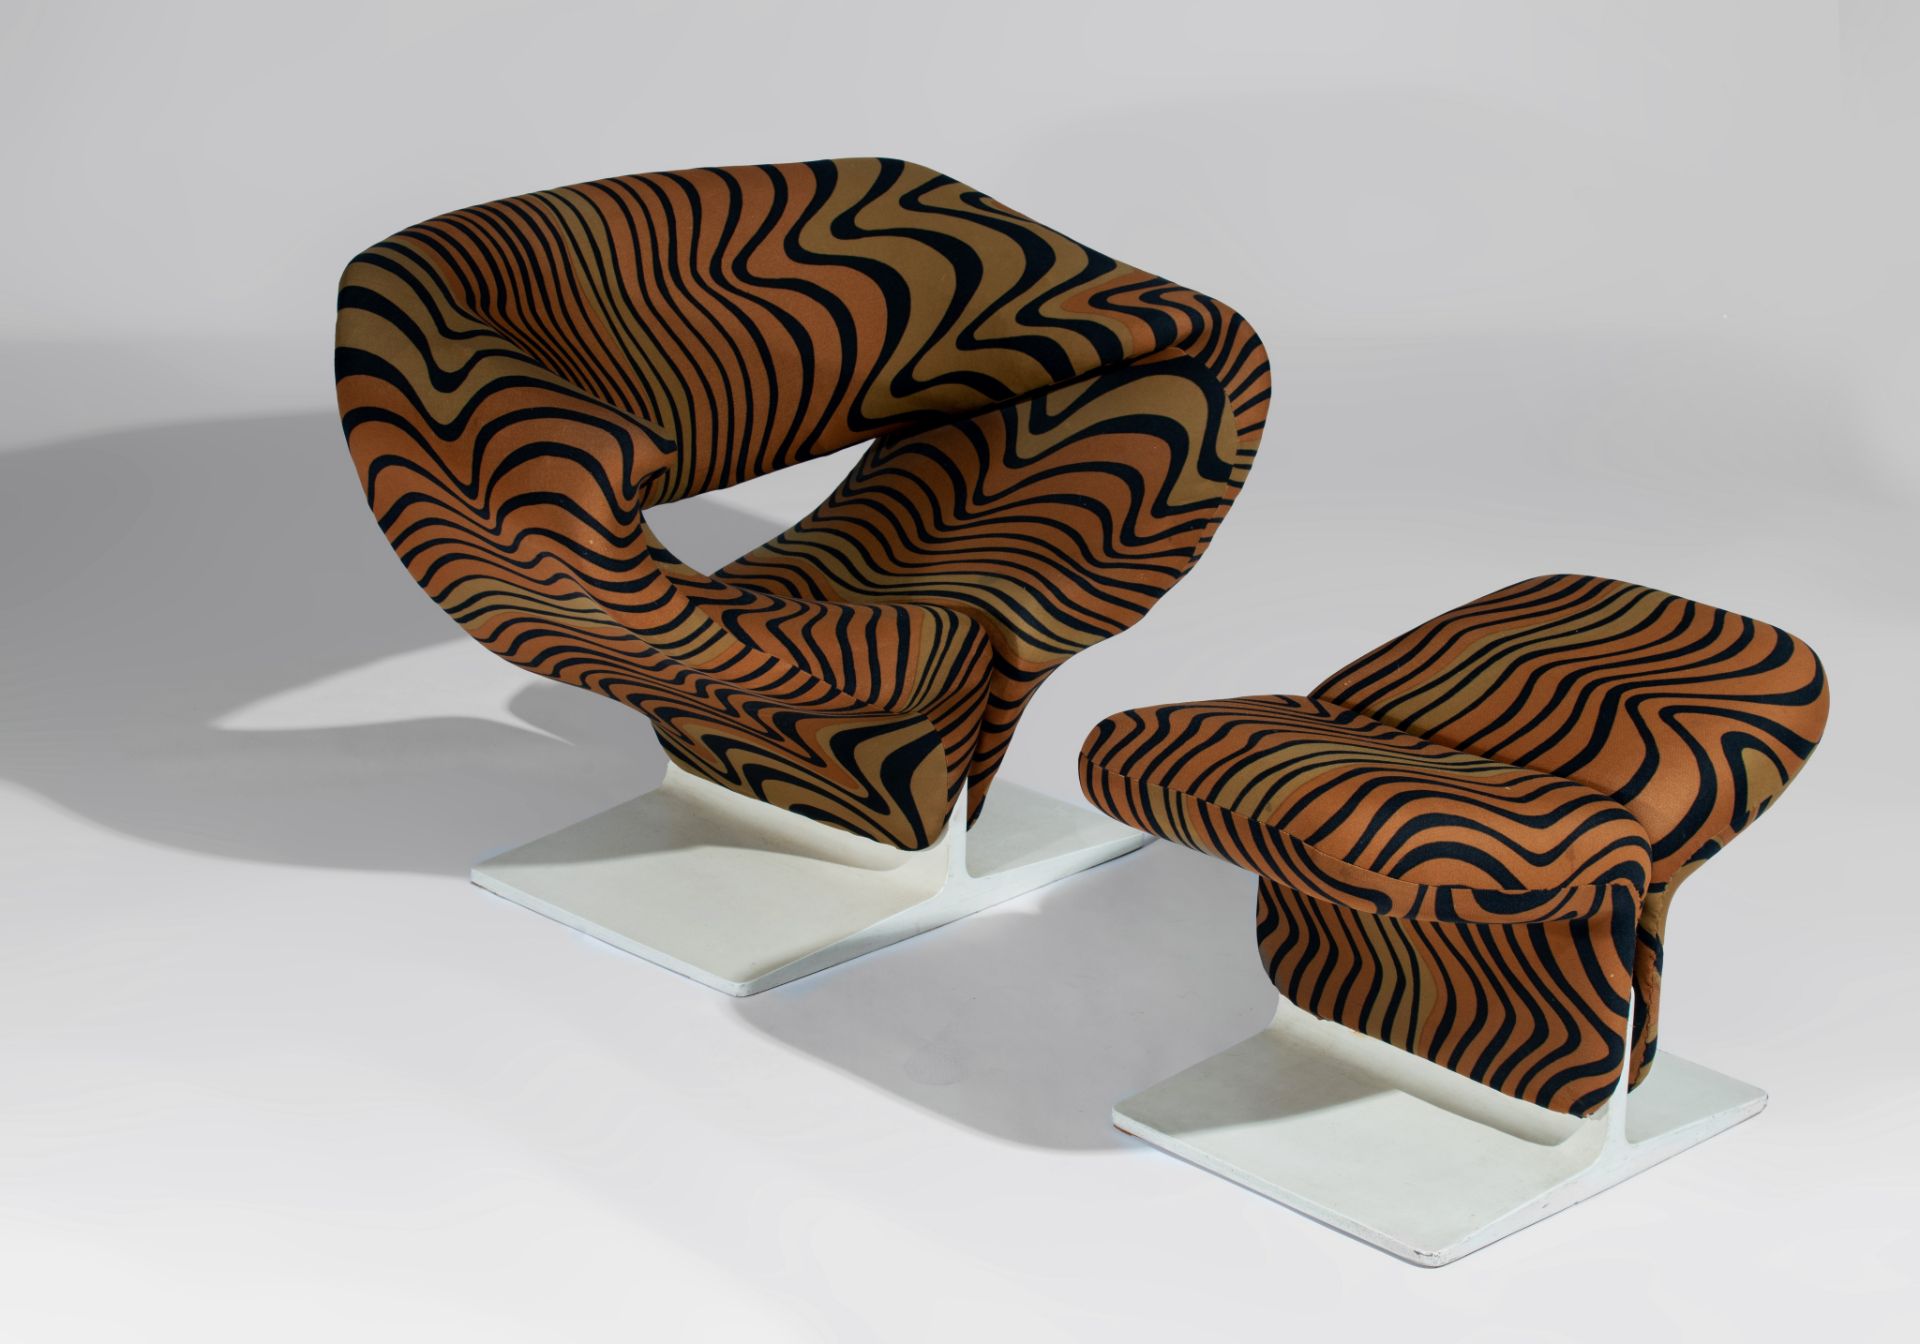 A rare Ribbon chair and ottoman by Pierre Paulin for Artifort, upholstered in 'Tiger' fabric by Jack - Image 3 of 20